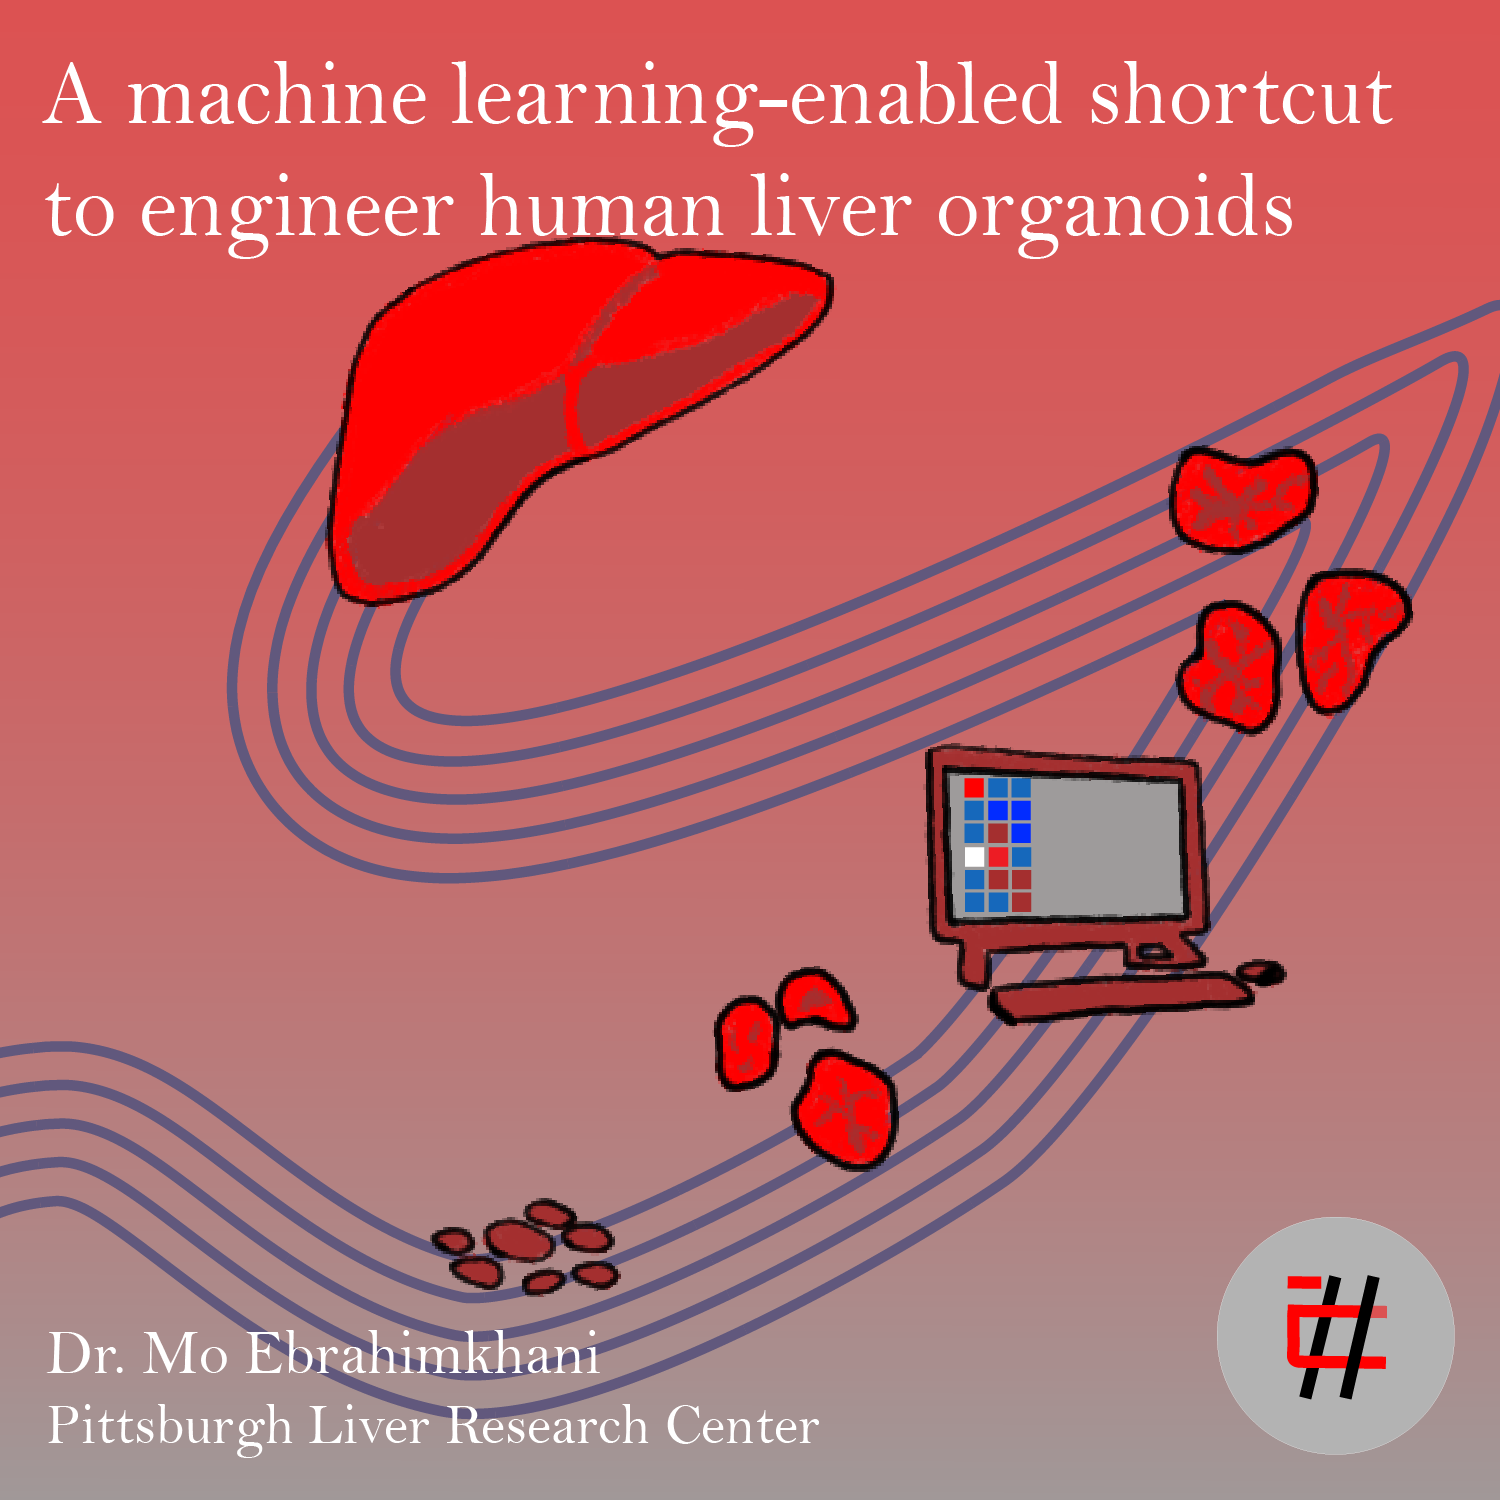 A machine learning-enabled shortcut to engineer human liver organoids